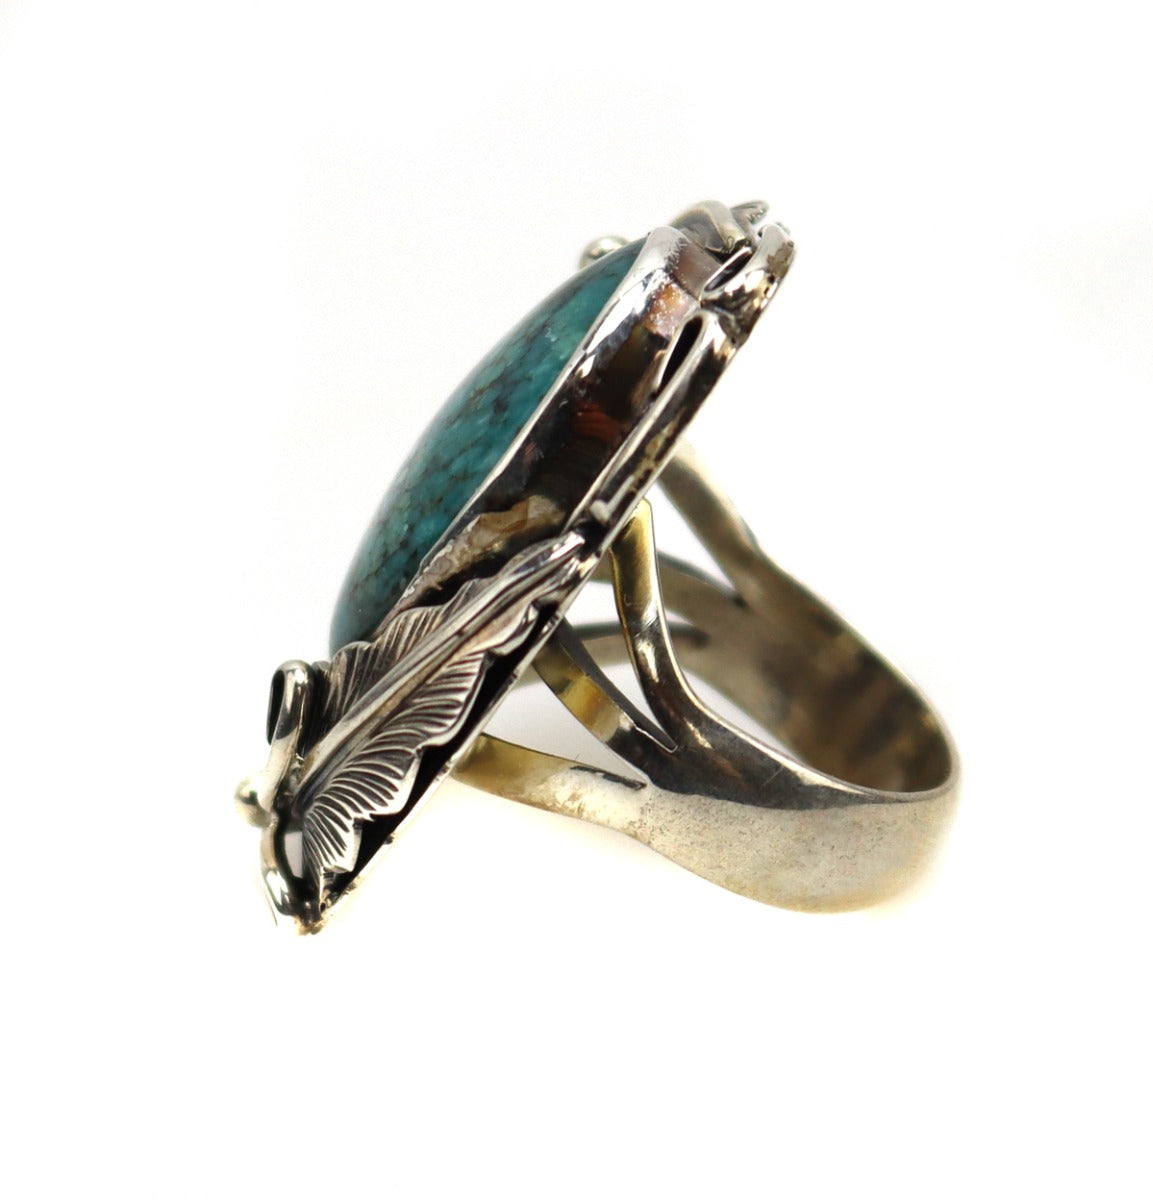 Navajo Turquoise and Silver Ring with Floral Design c. 1980-90s, size 6.25 (J13493) 1
